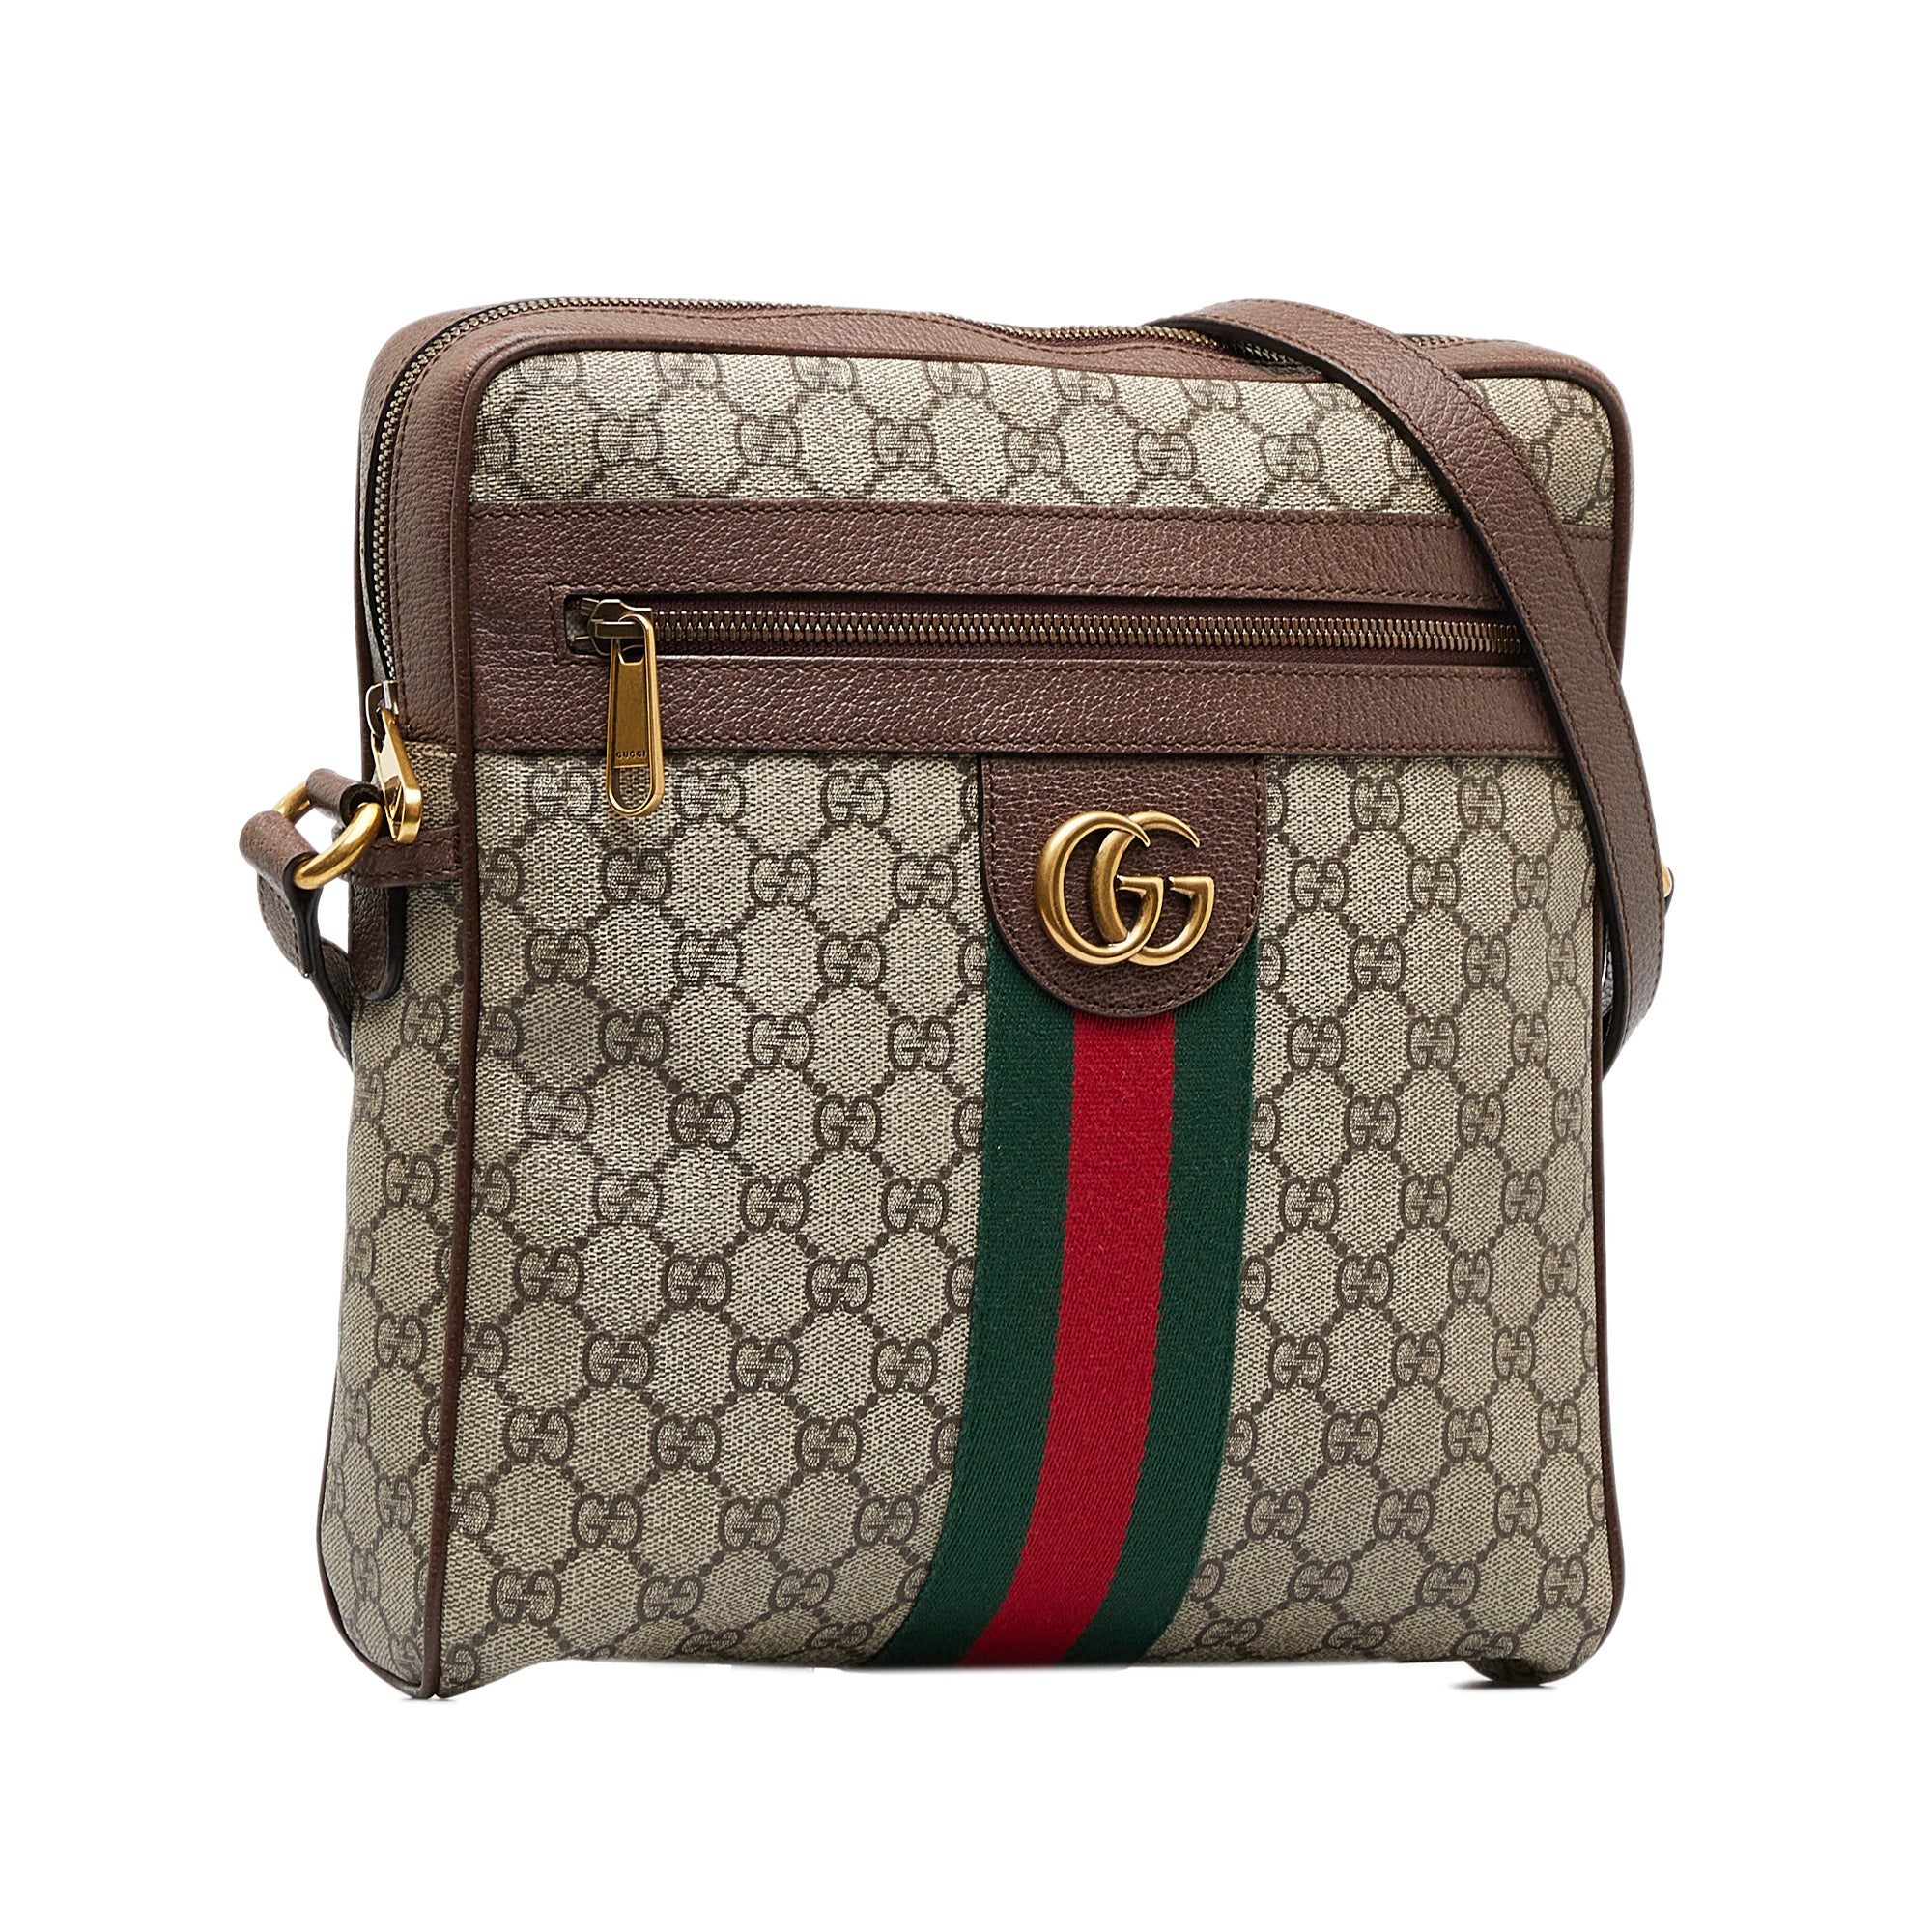 Gucci GG Supreme Web Medium Ophidia Carry-On Duffle Bag w/Tags